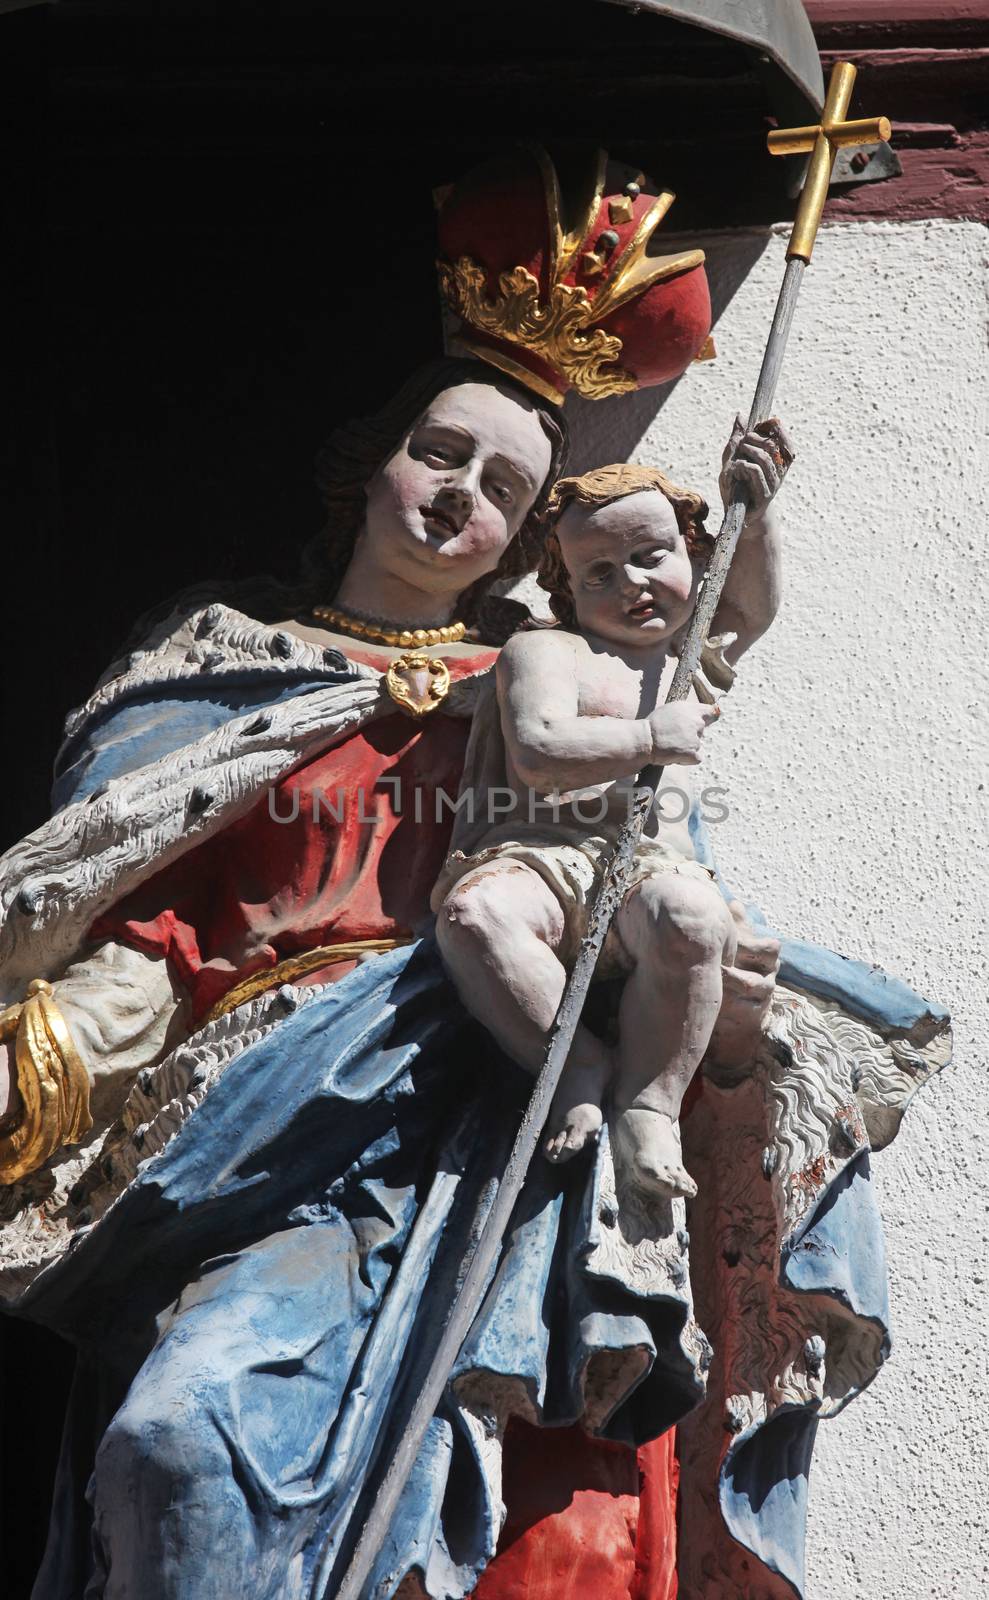 Madonna with child Jesus by atlas